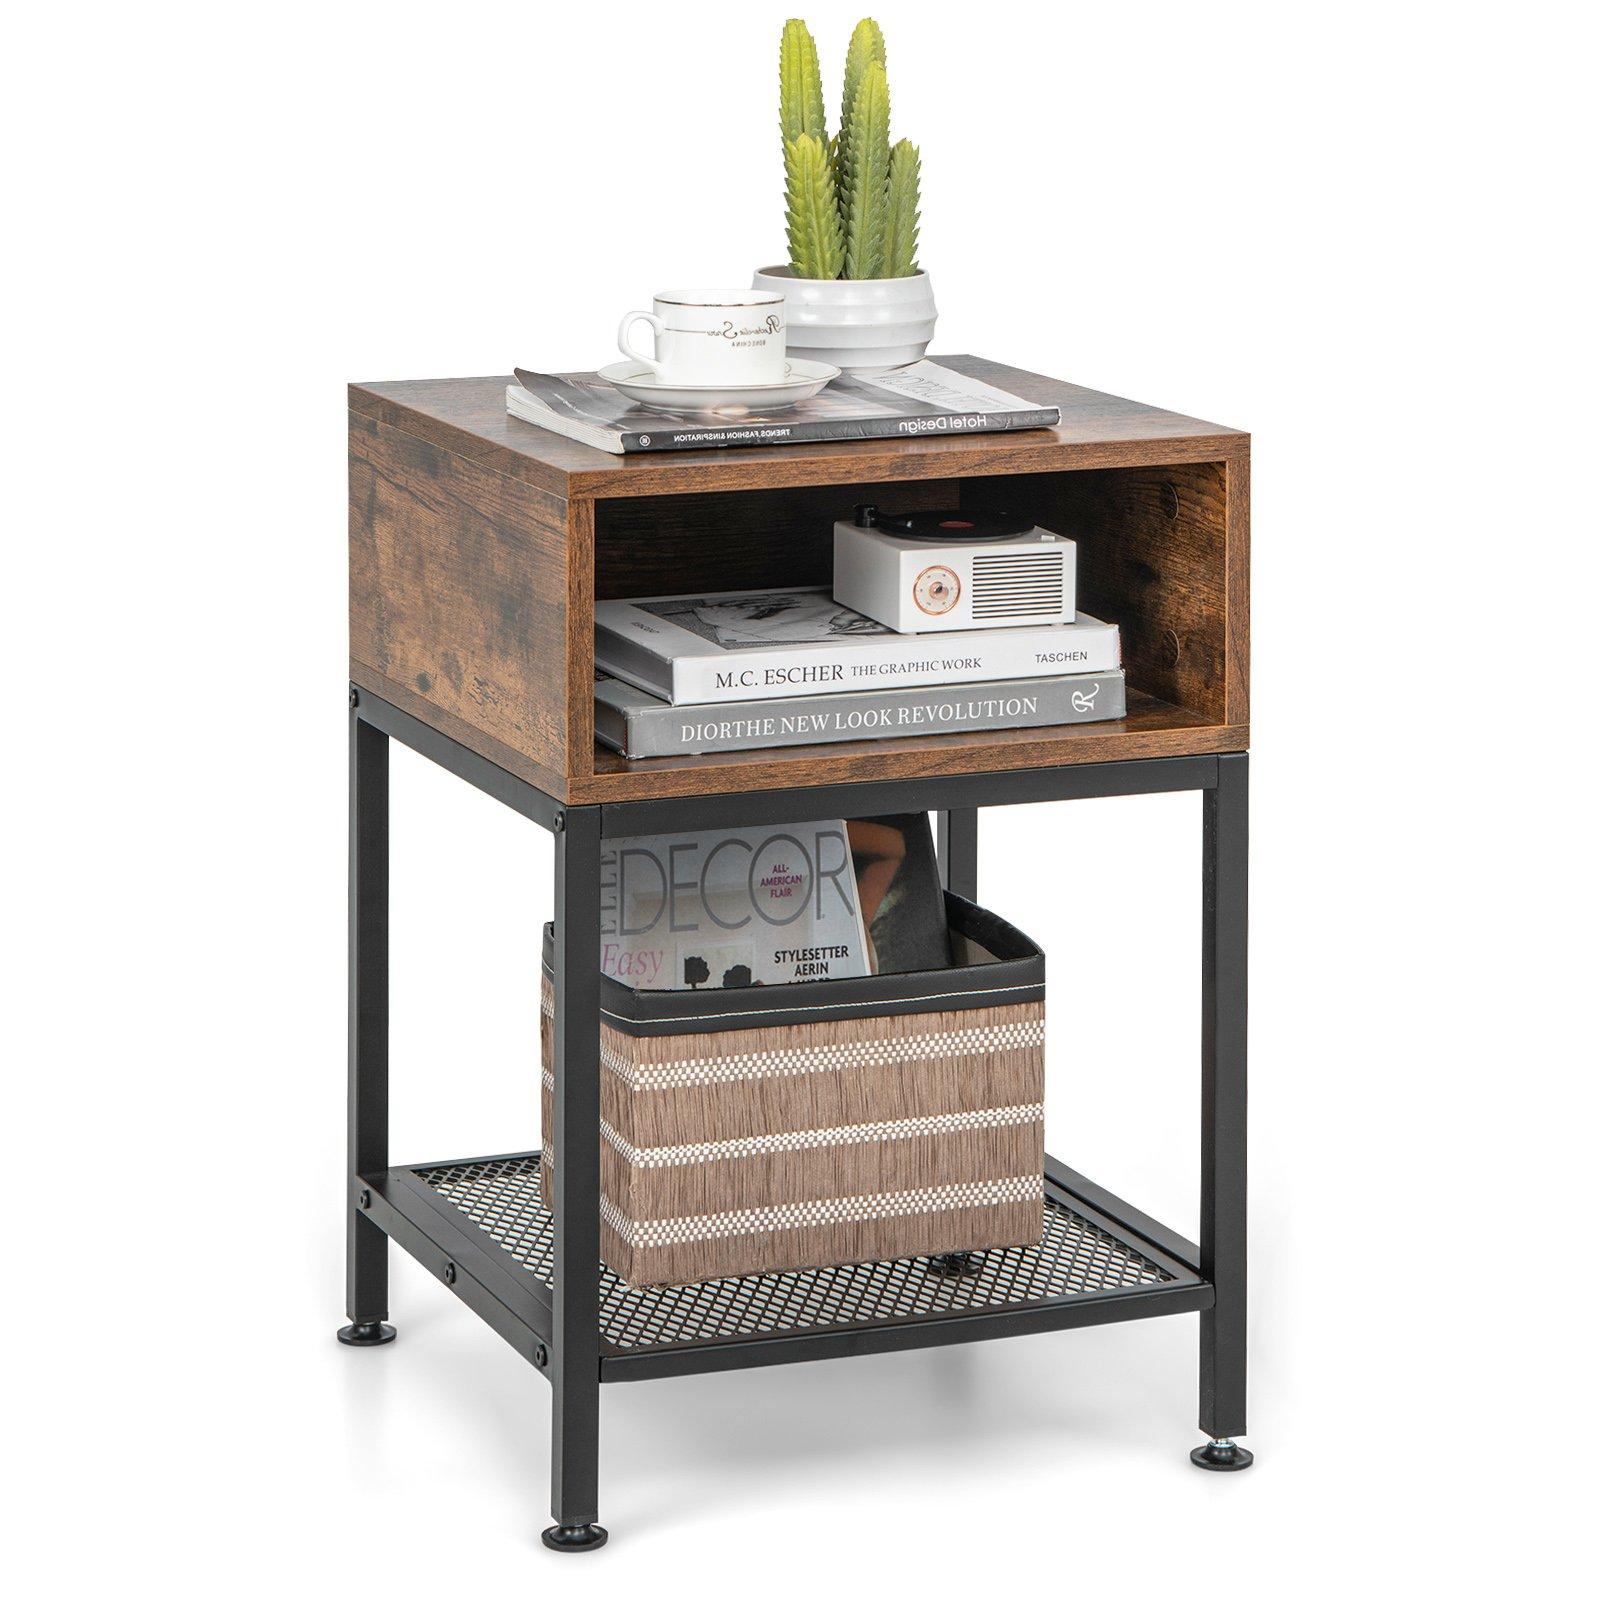 40cm Wood Top End Table w/ Metal Frame 3-tier Square Side Table w/ Storage Cube & Mesh Shelf